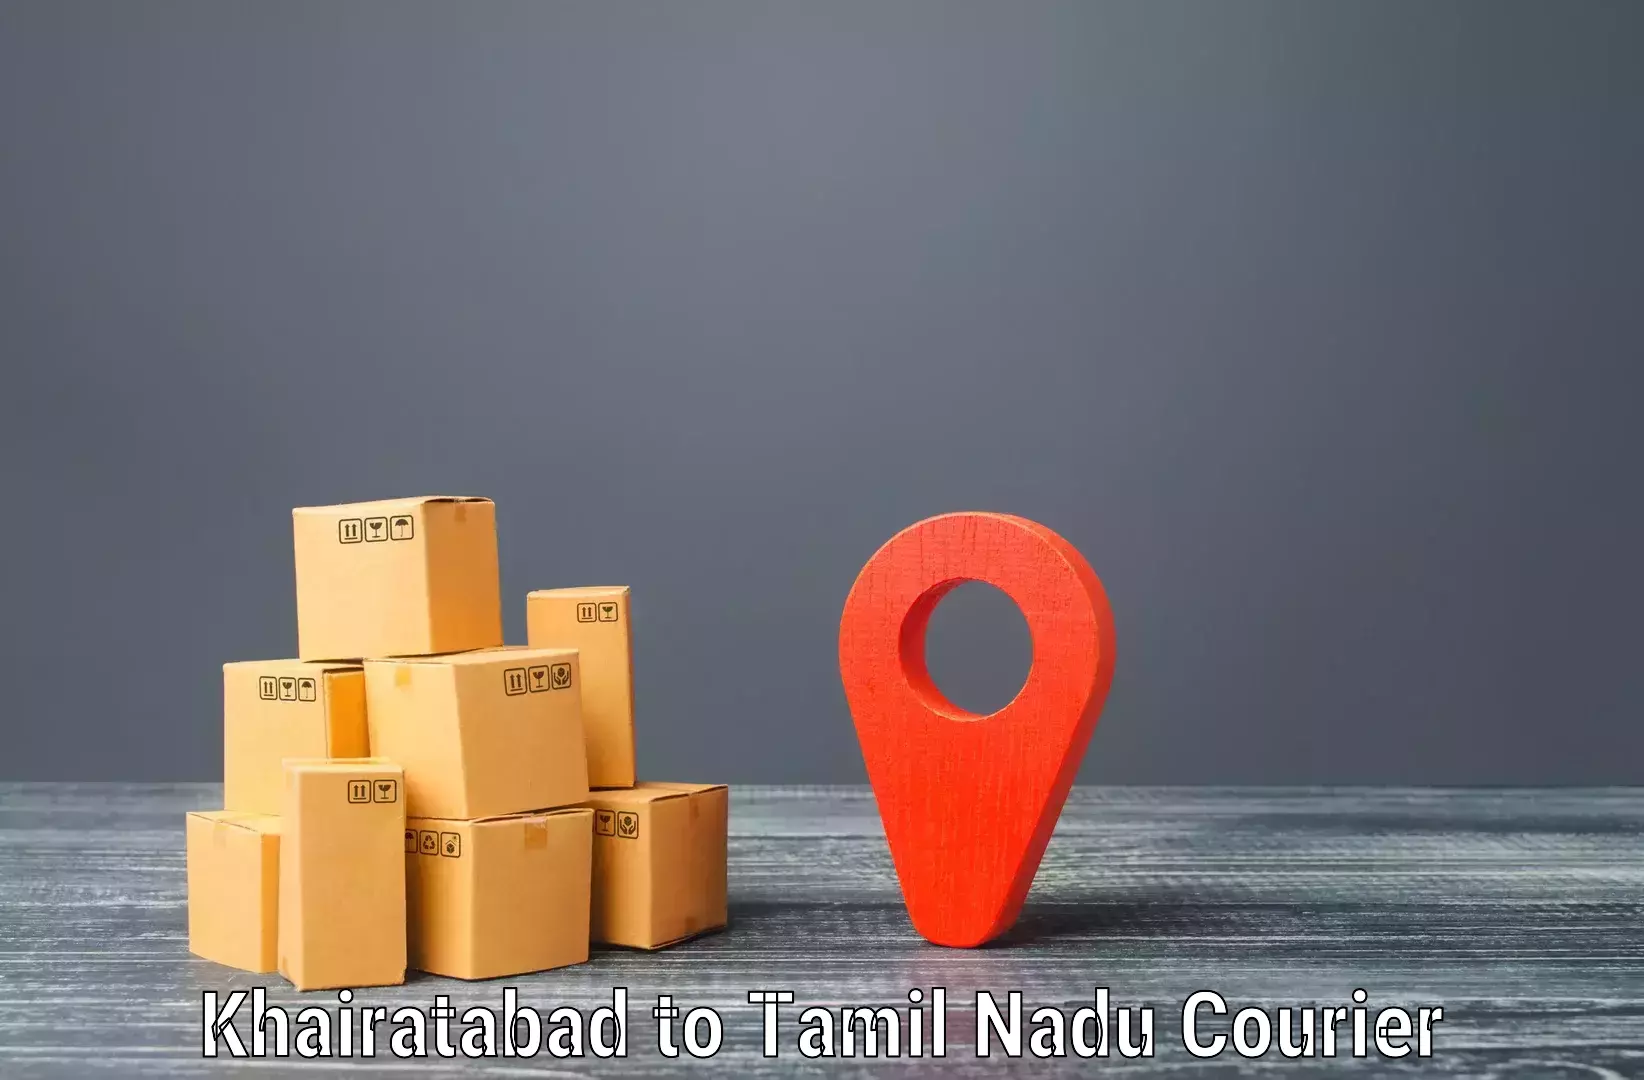 Express delivery capabilities Khairatabad to Thondi